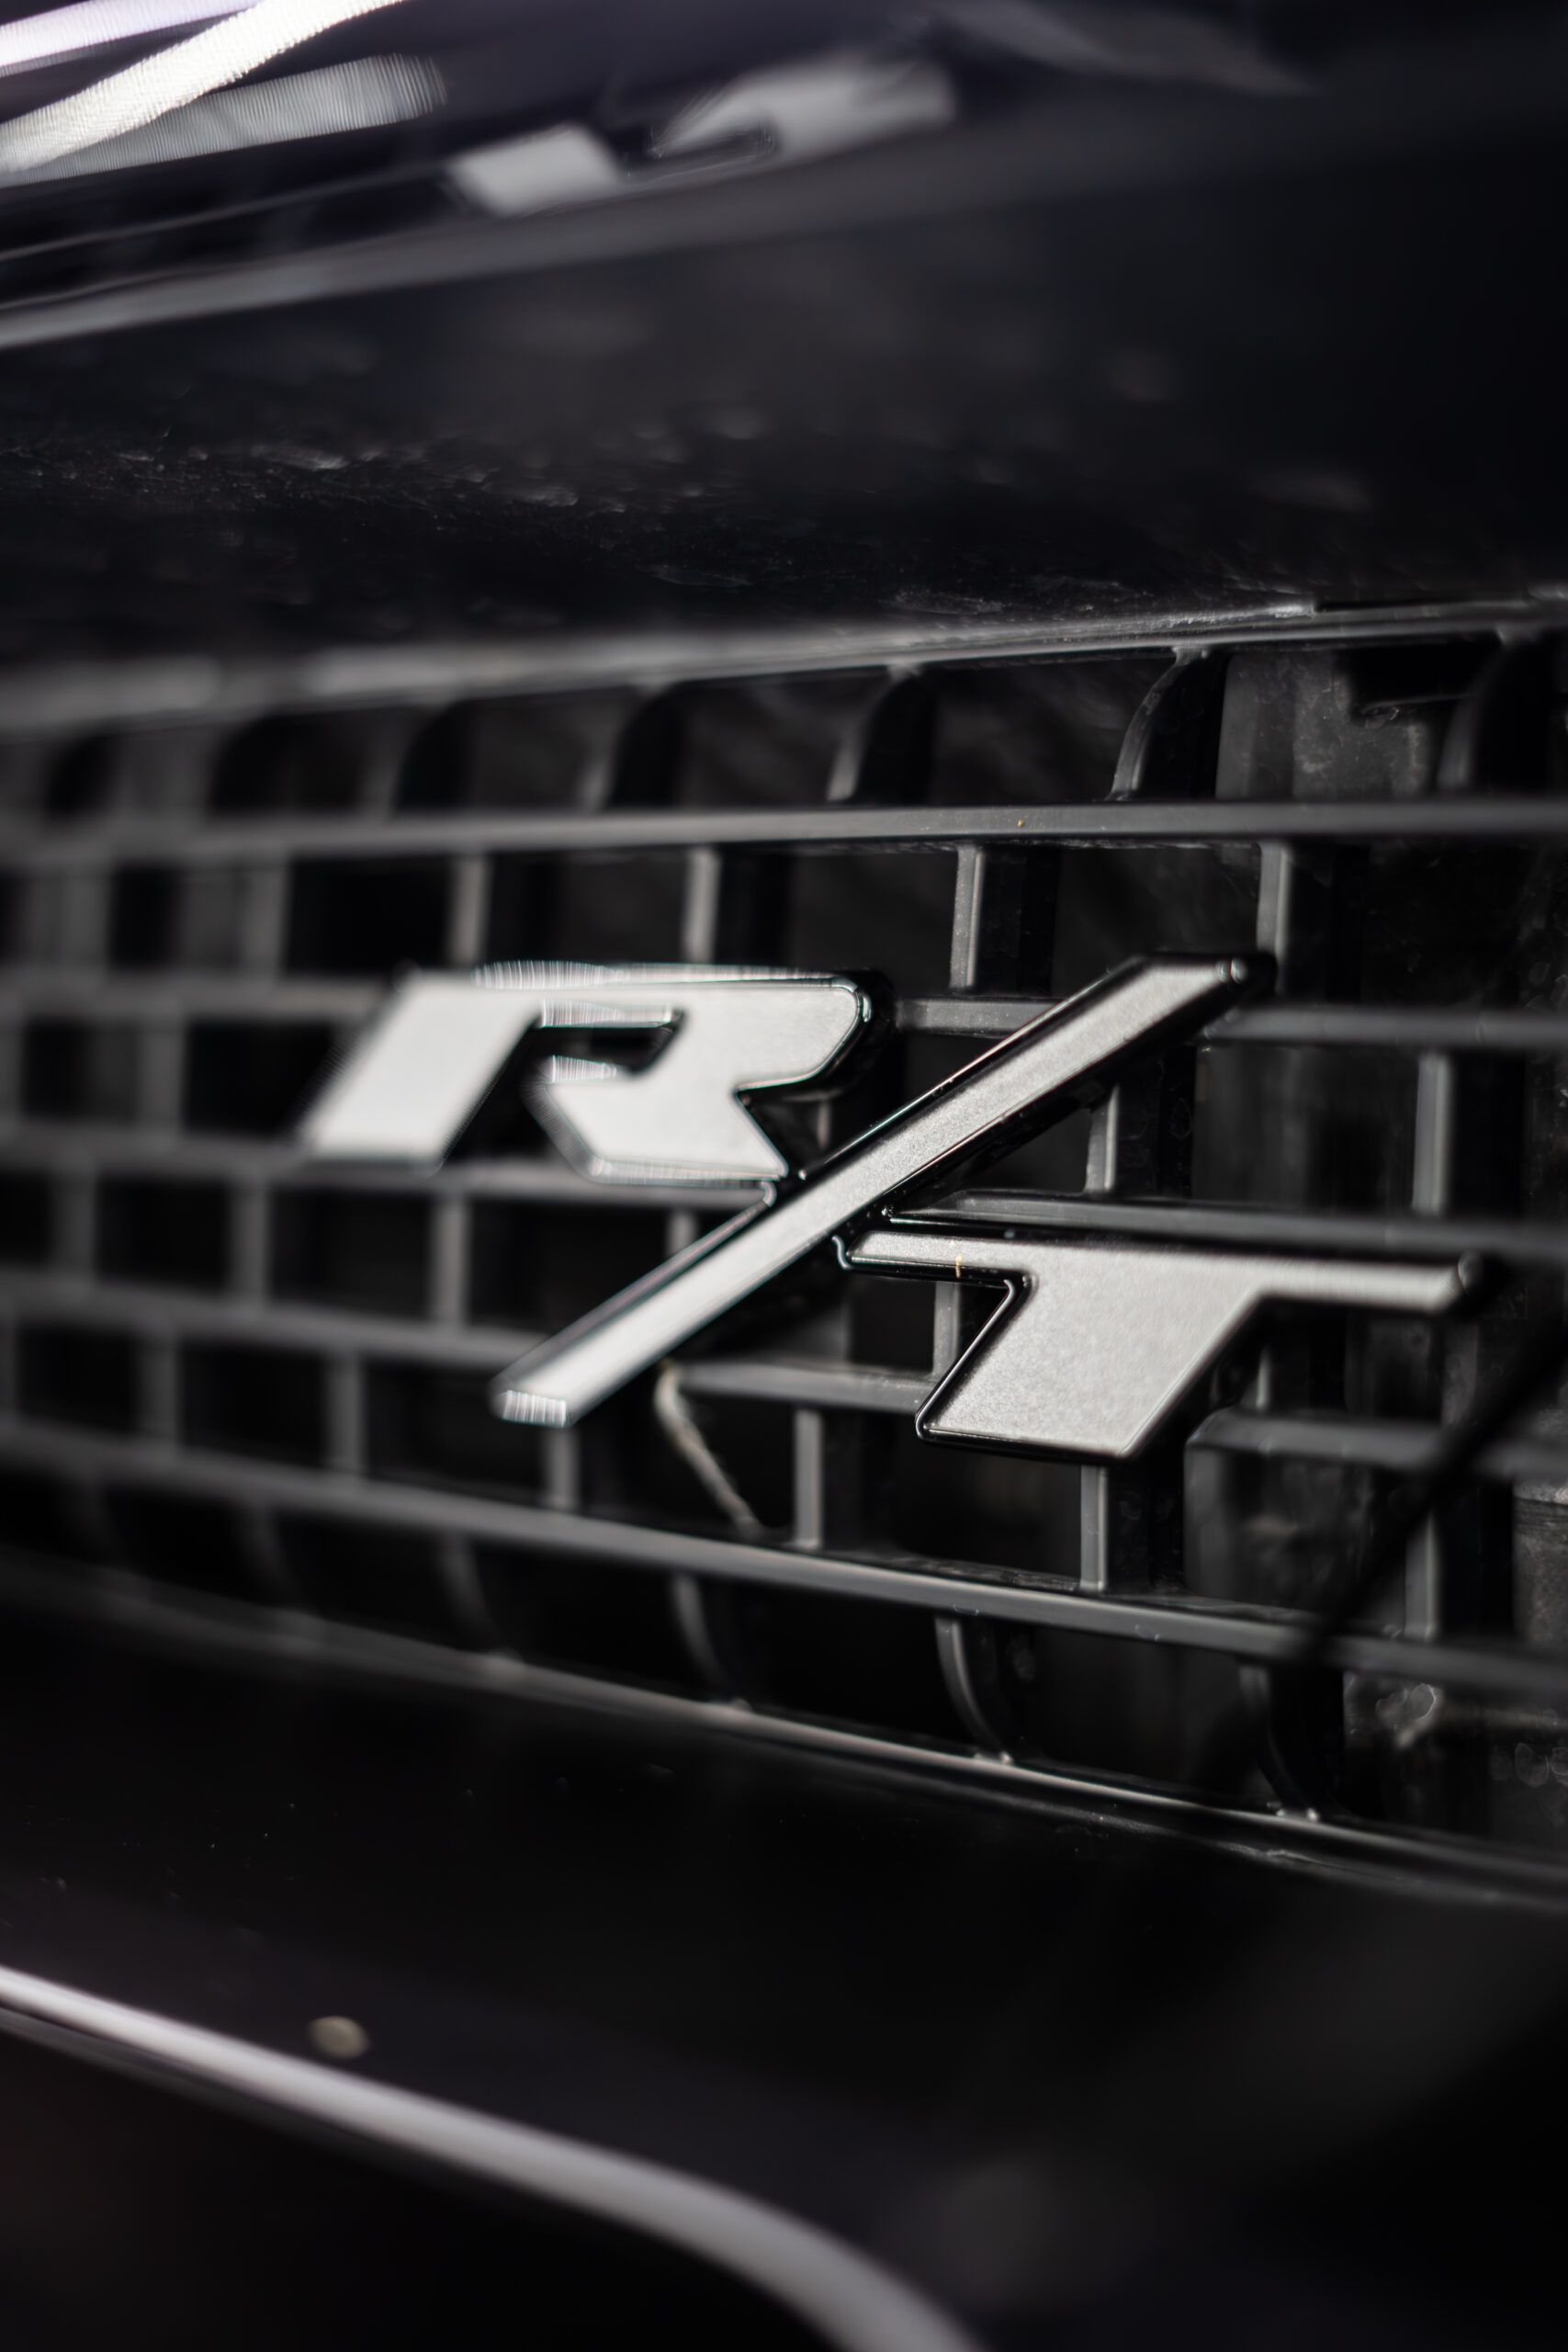 A close up of a car grille with the letters r and t on it.